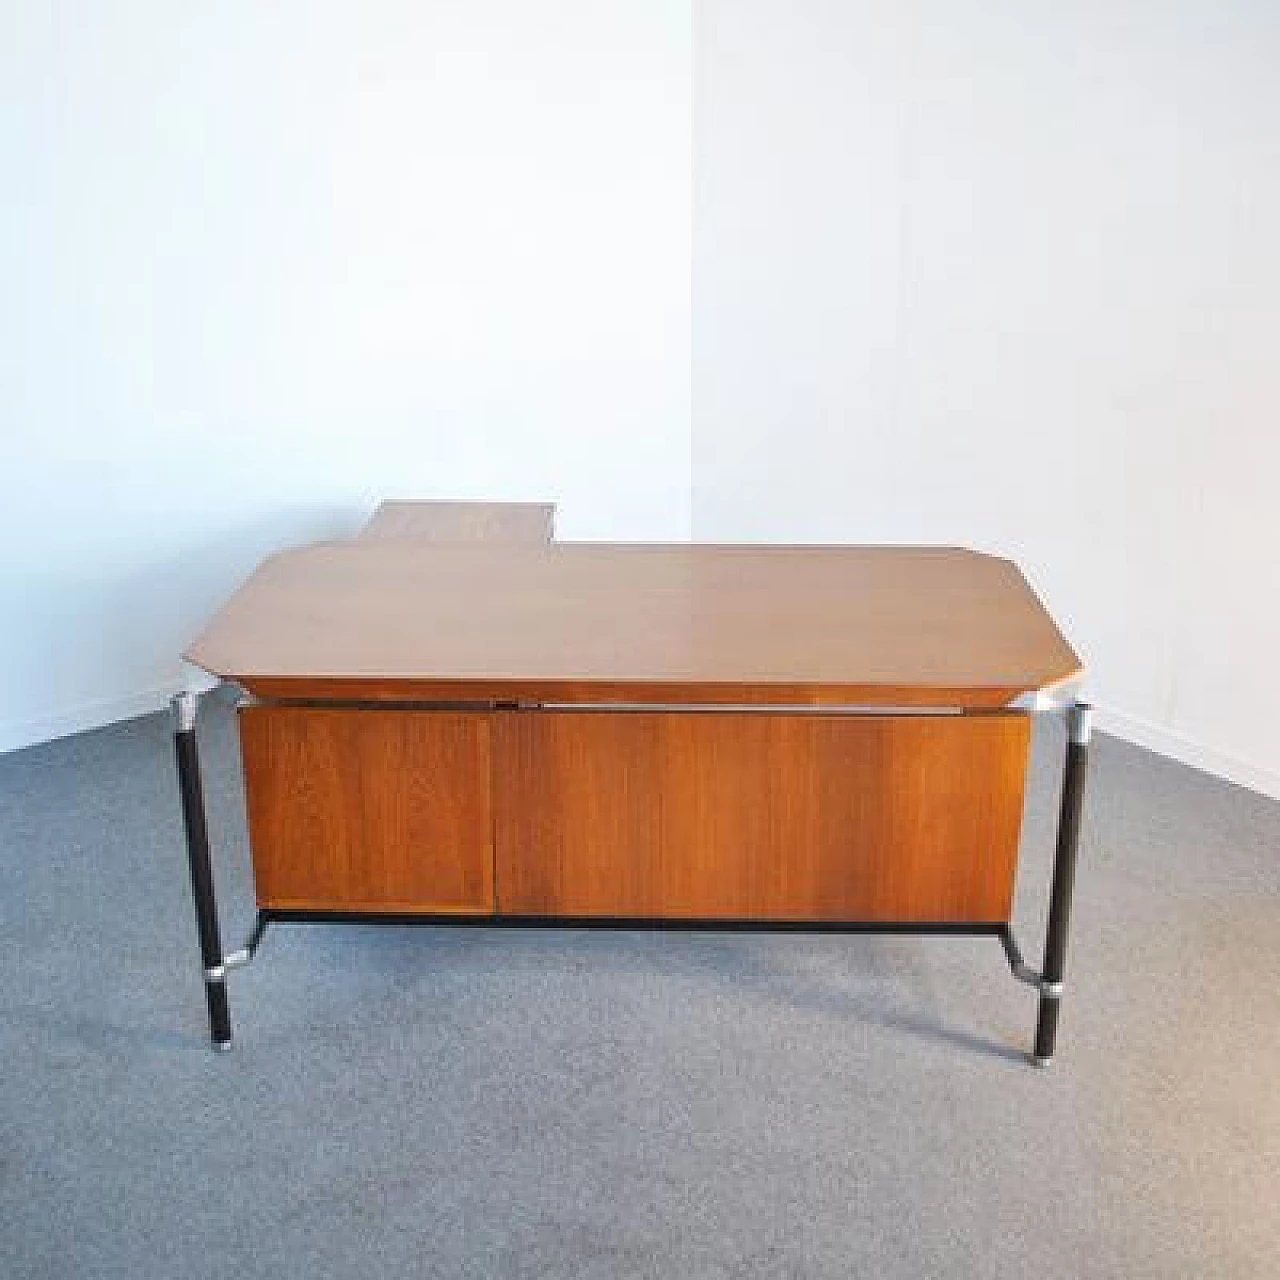 Executive desk by Ico Parisi for MIM Rome, 1950s 1412240